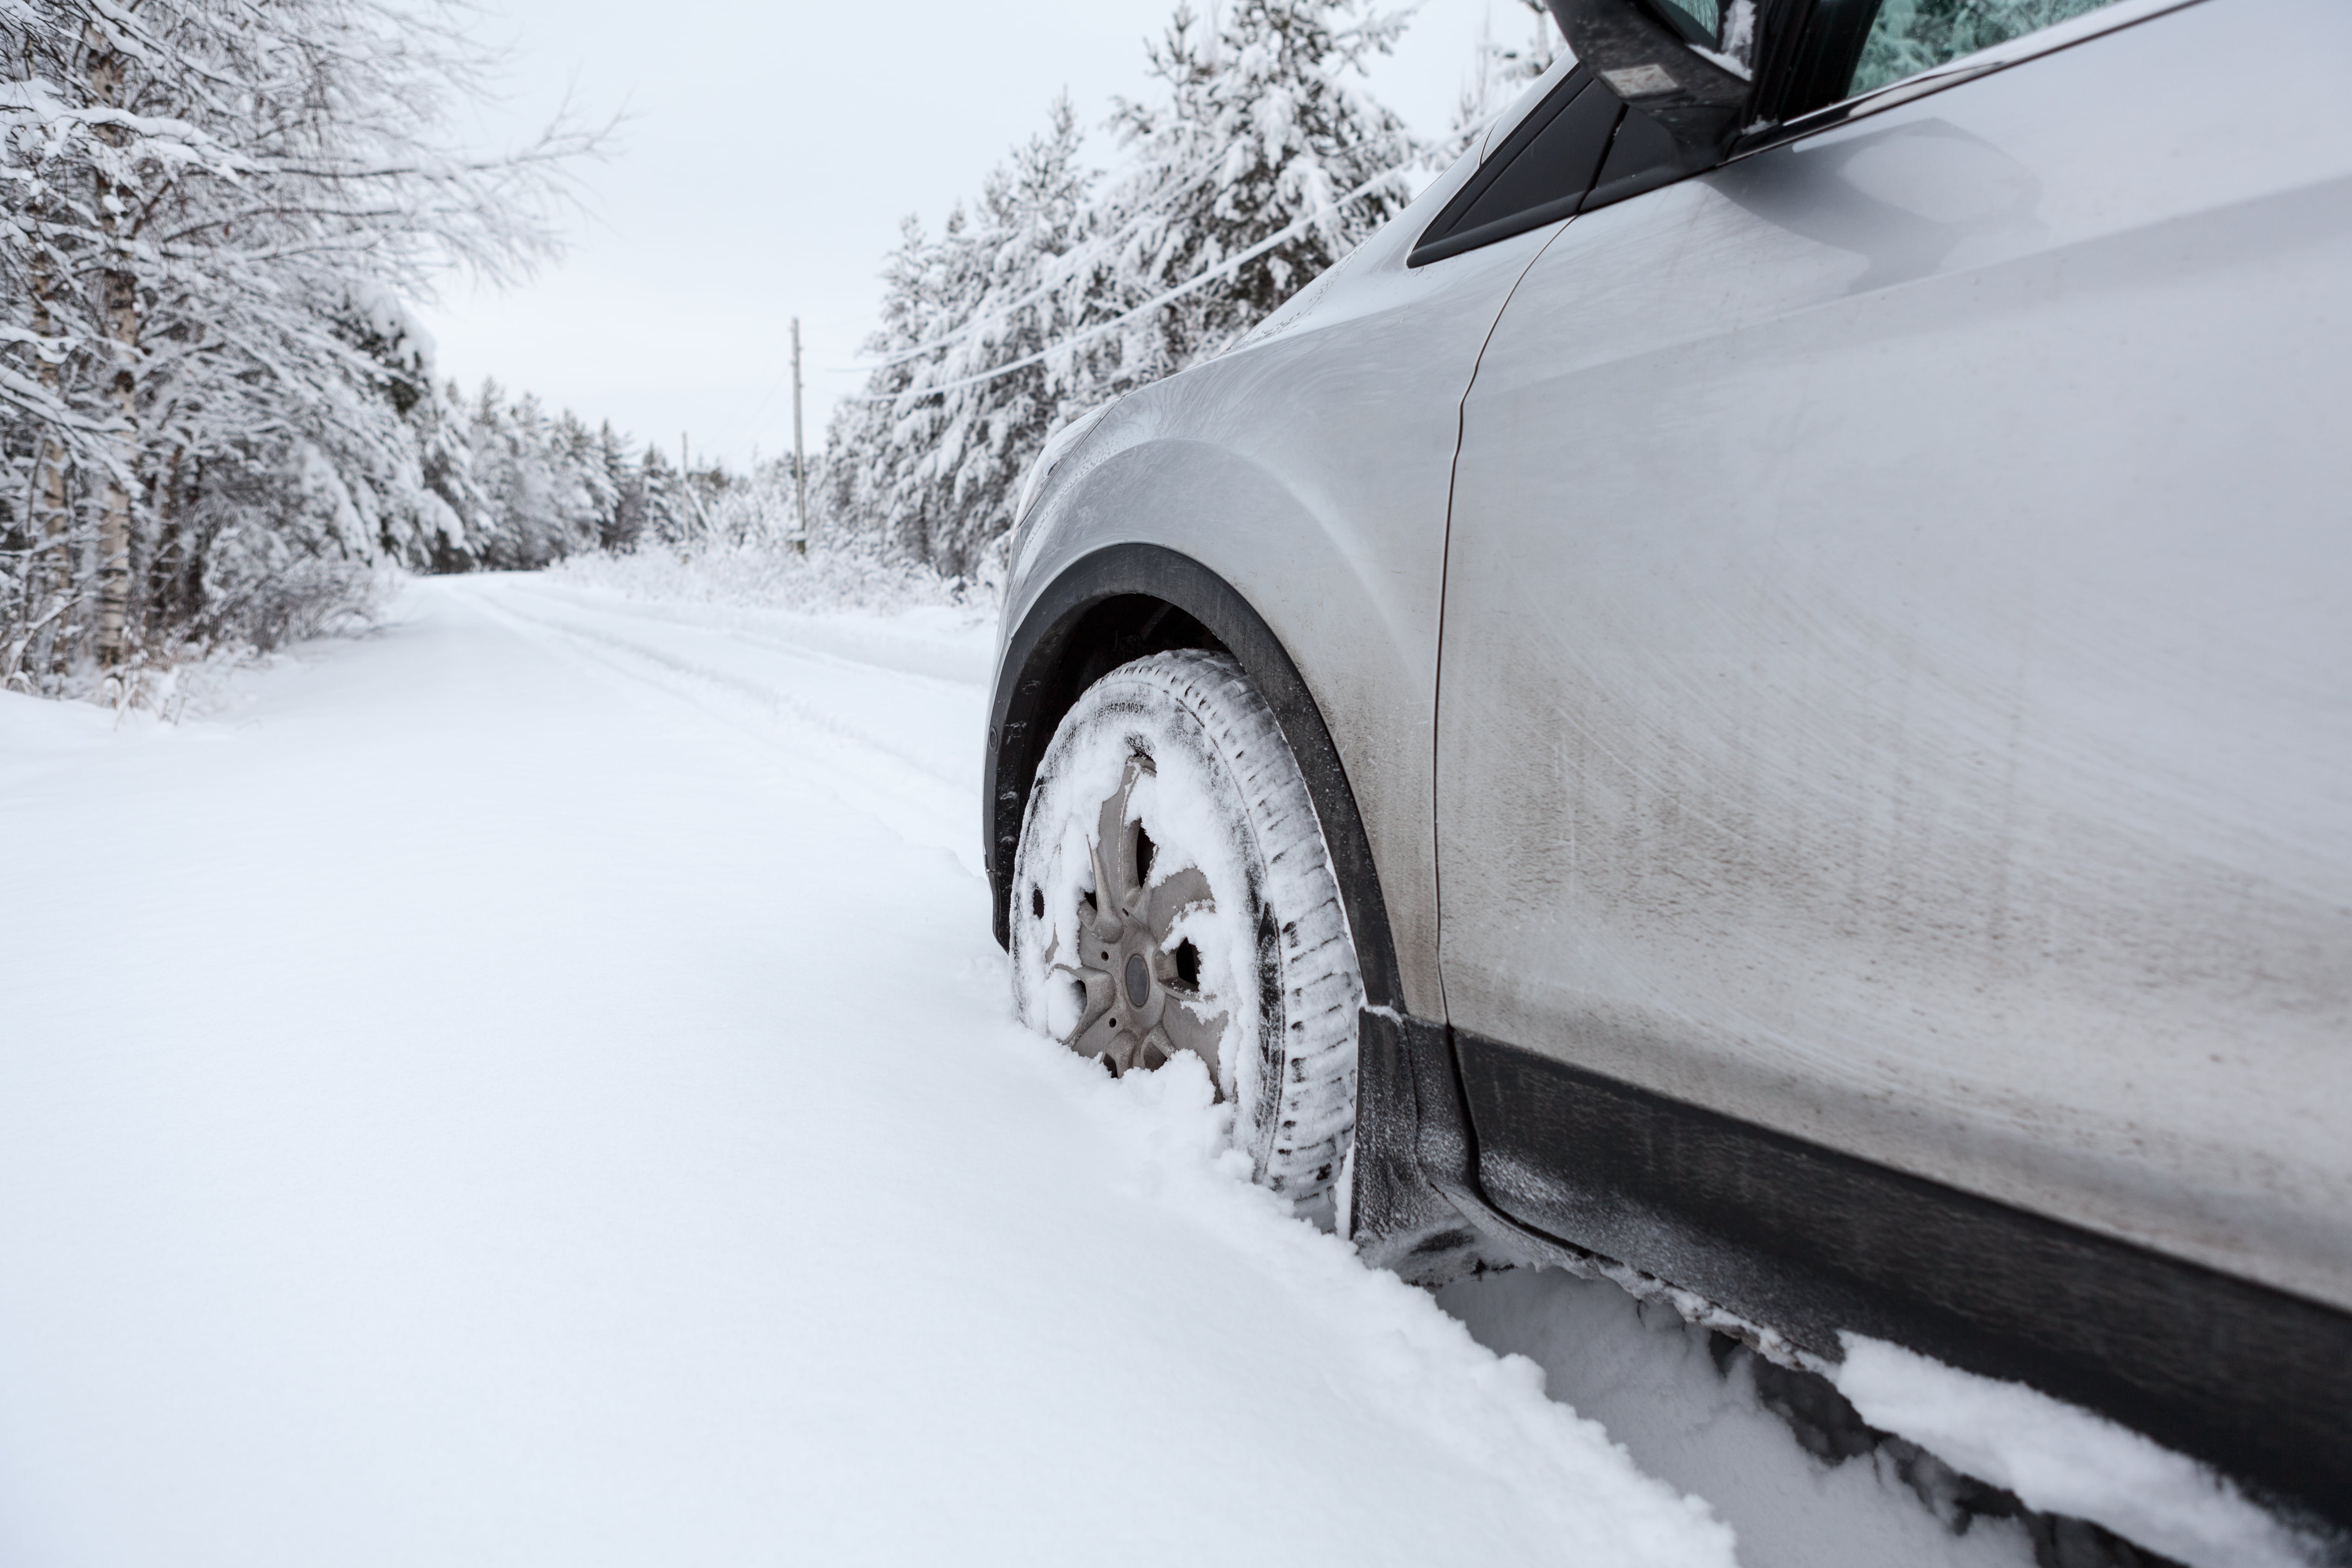 6 Things to Do When Your Car is Stuck in Snow